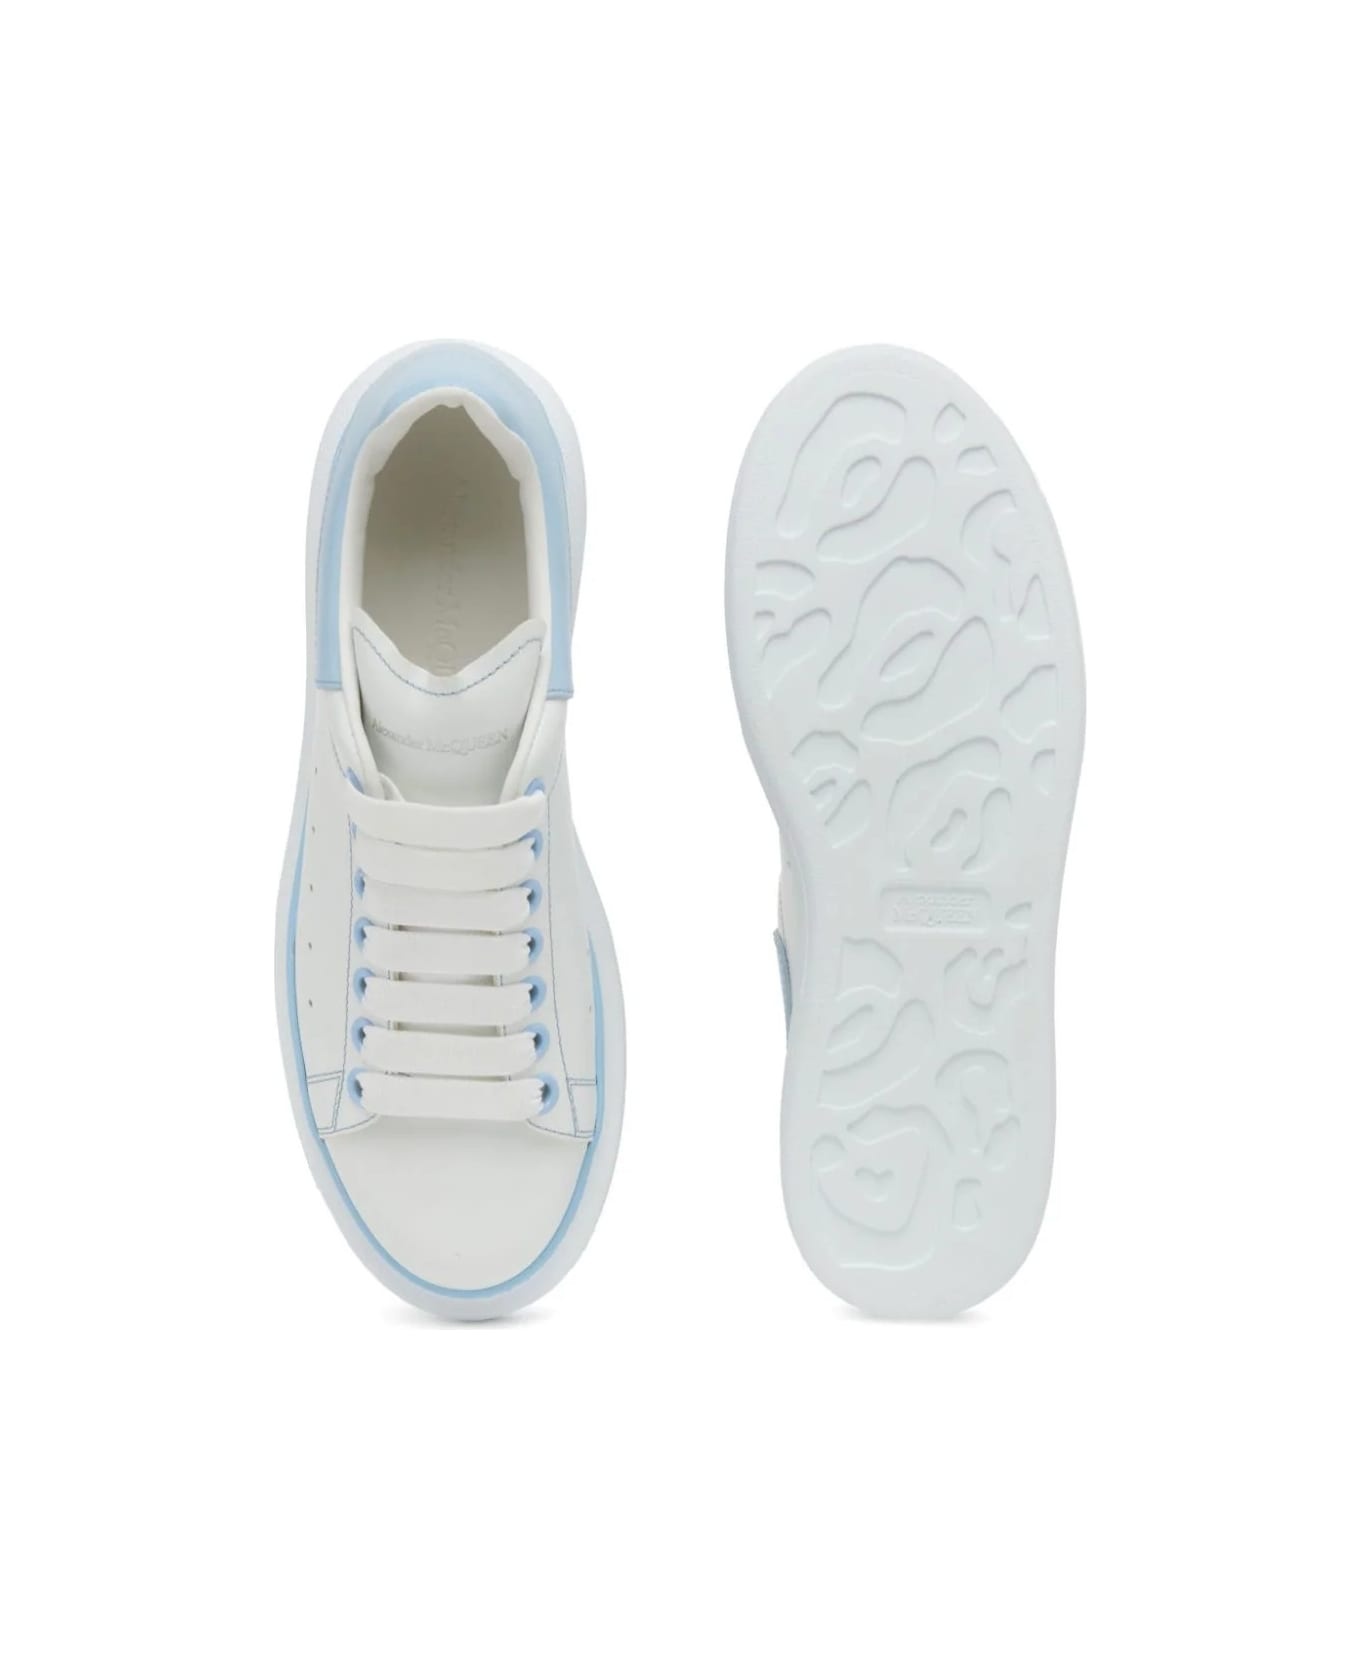 White Oversized Sneakers With Powder Blue Details - 5